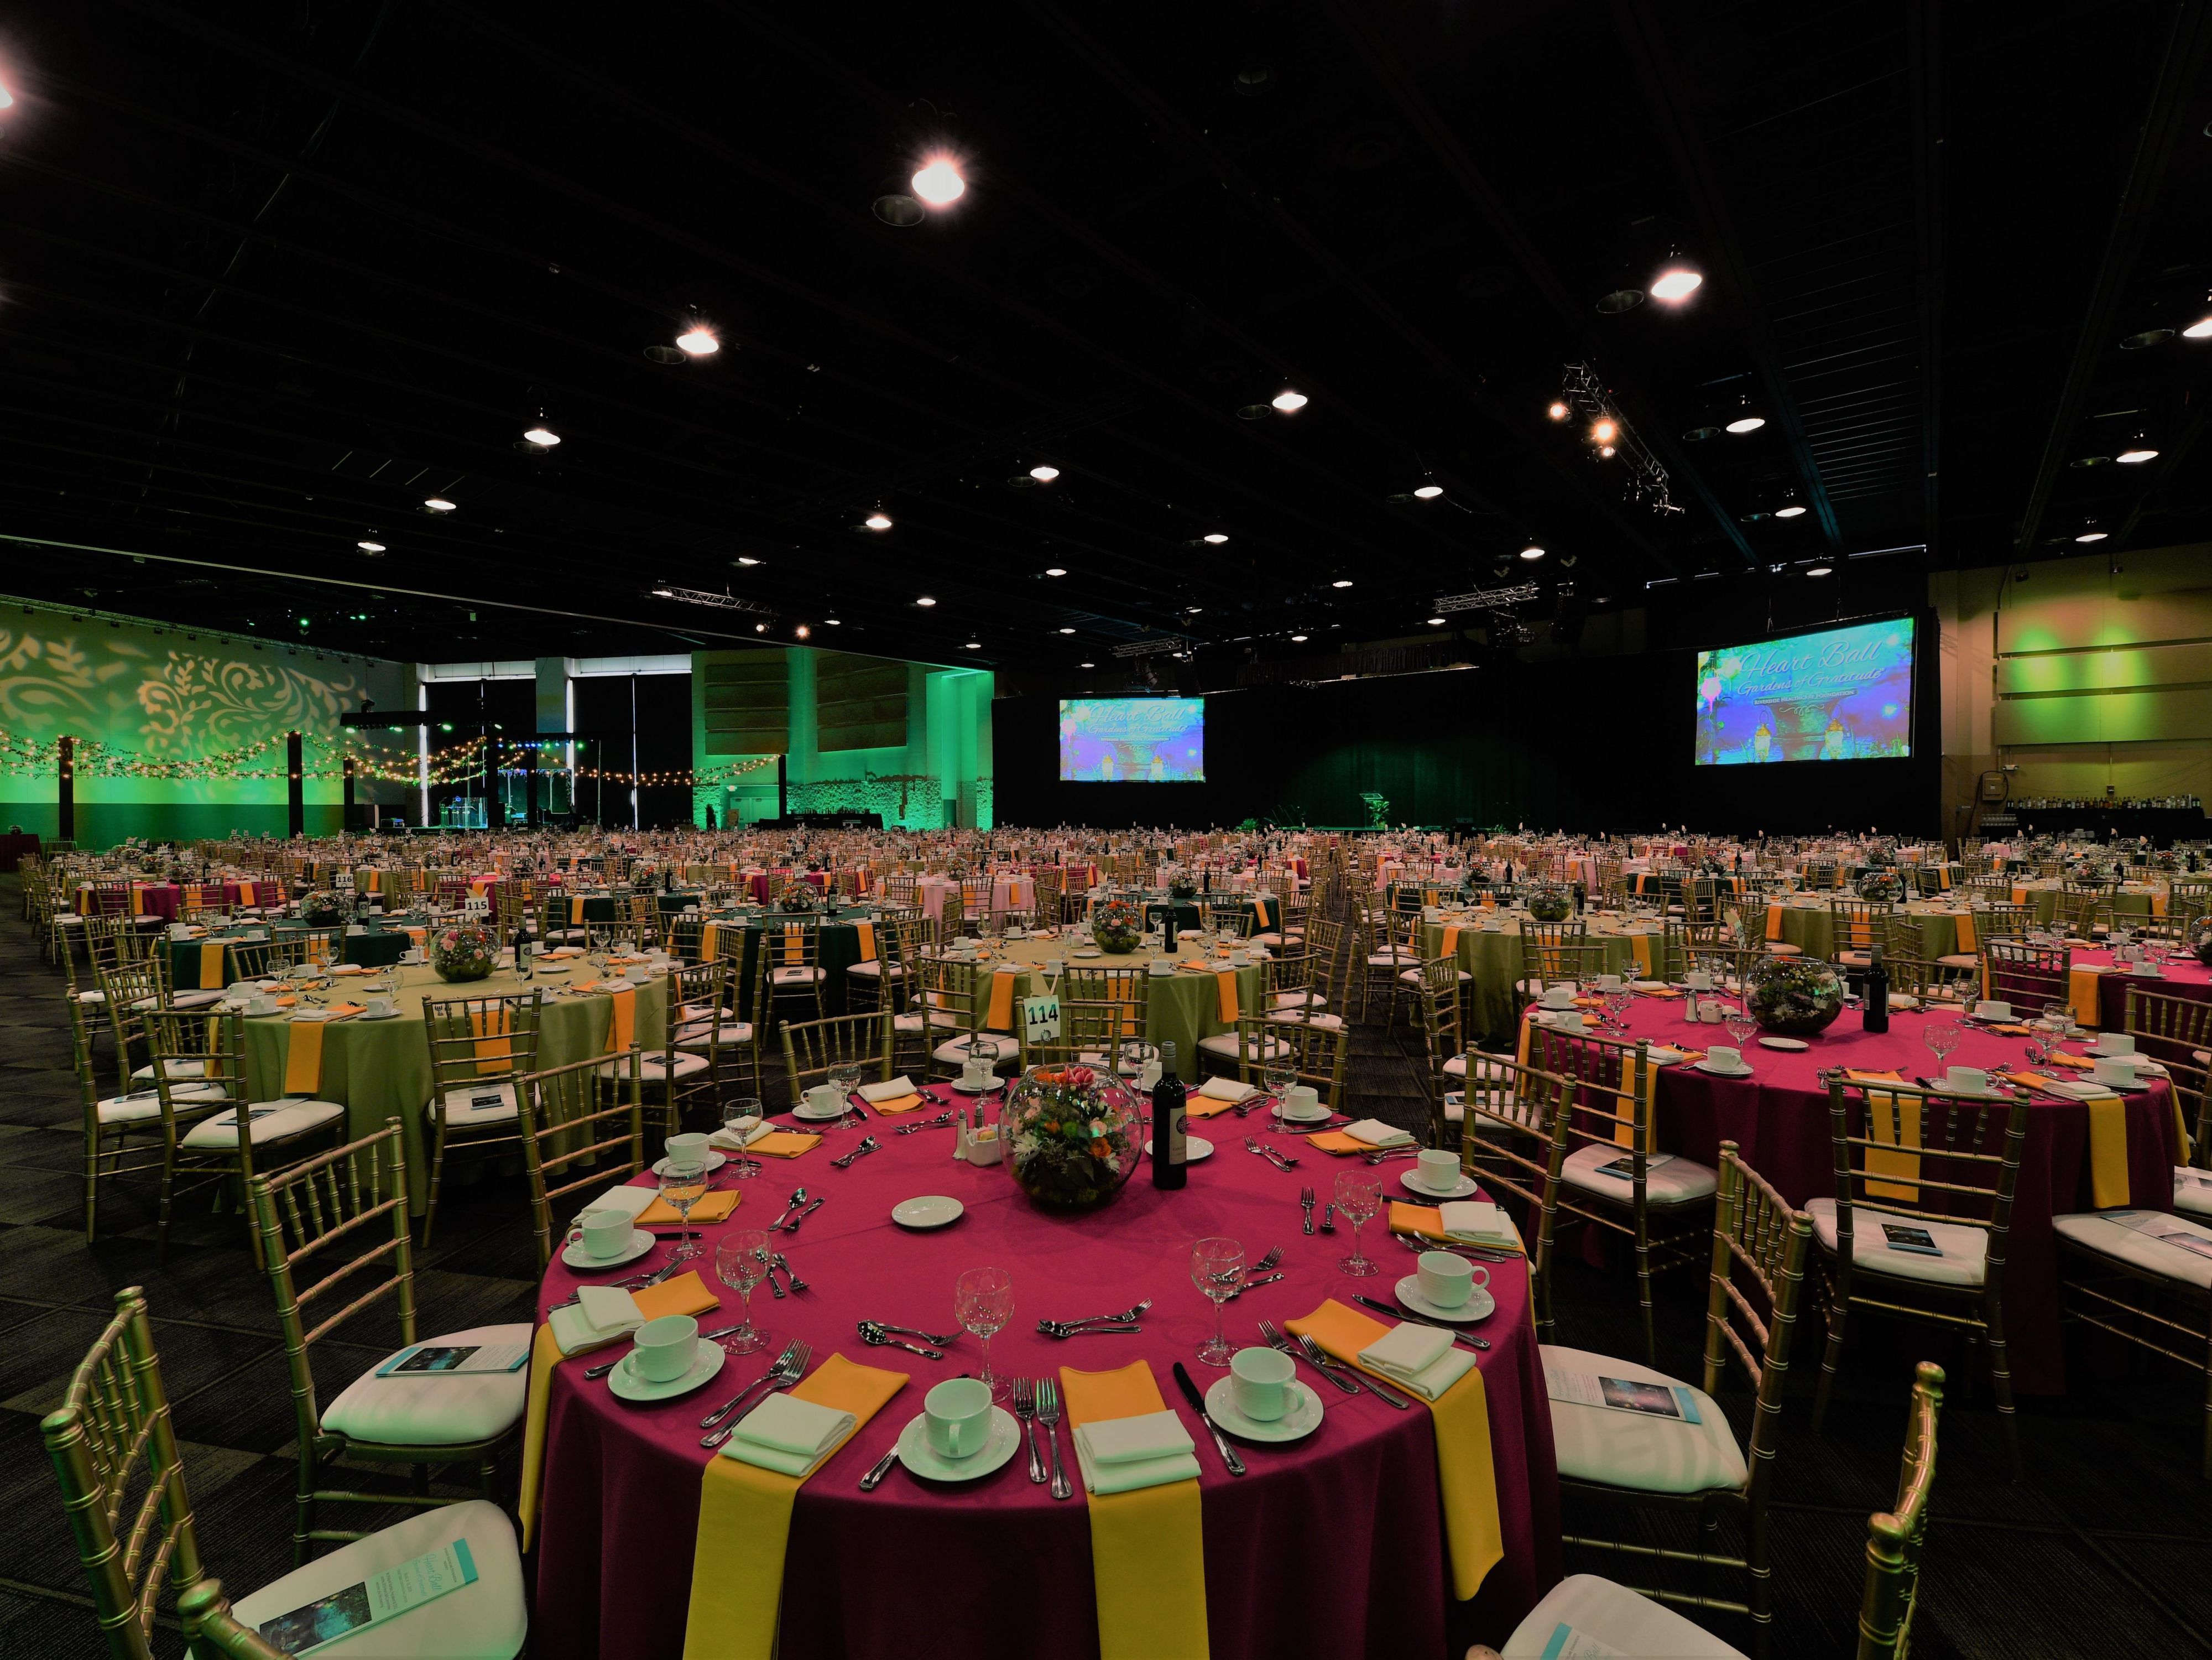 Attached to the Tinley Park Convention Center, our hotel is the ideal setting to plan all types of events. With 70,000 square feet of event space and complimentary Wi-Fi, host or attend conferences, conventions, trade shows or plan your dream wedding. Our team will work with you to ensure every detail for your event is arranged well.